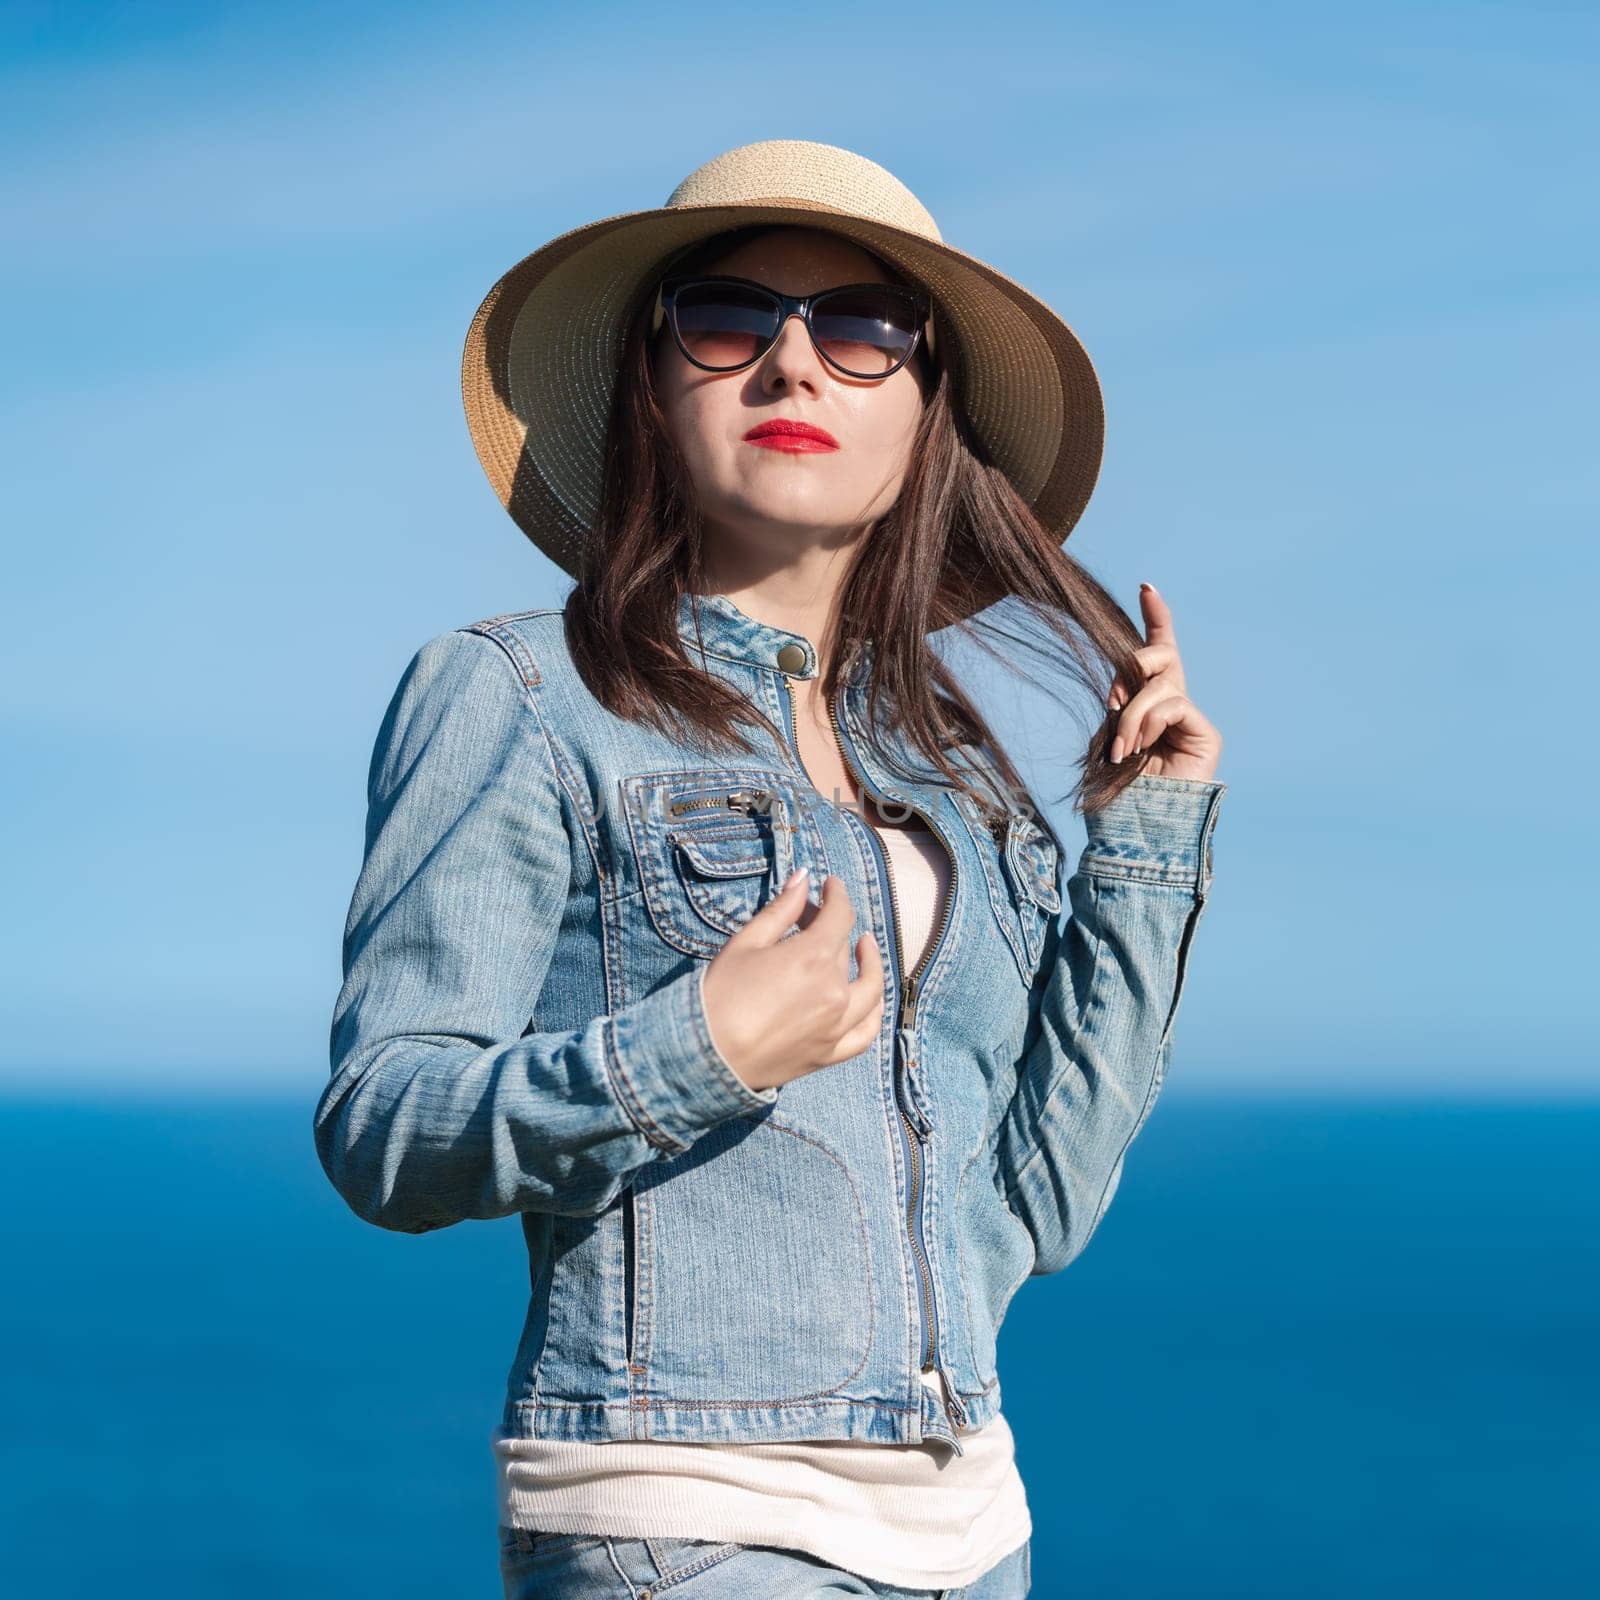 Portrait of brunette female in denim jacket, jeans, straw hat on head and sunglasses looking at camera. Hipster adult woman standing on background of blue sky and ocean on summer sunny day